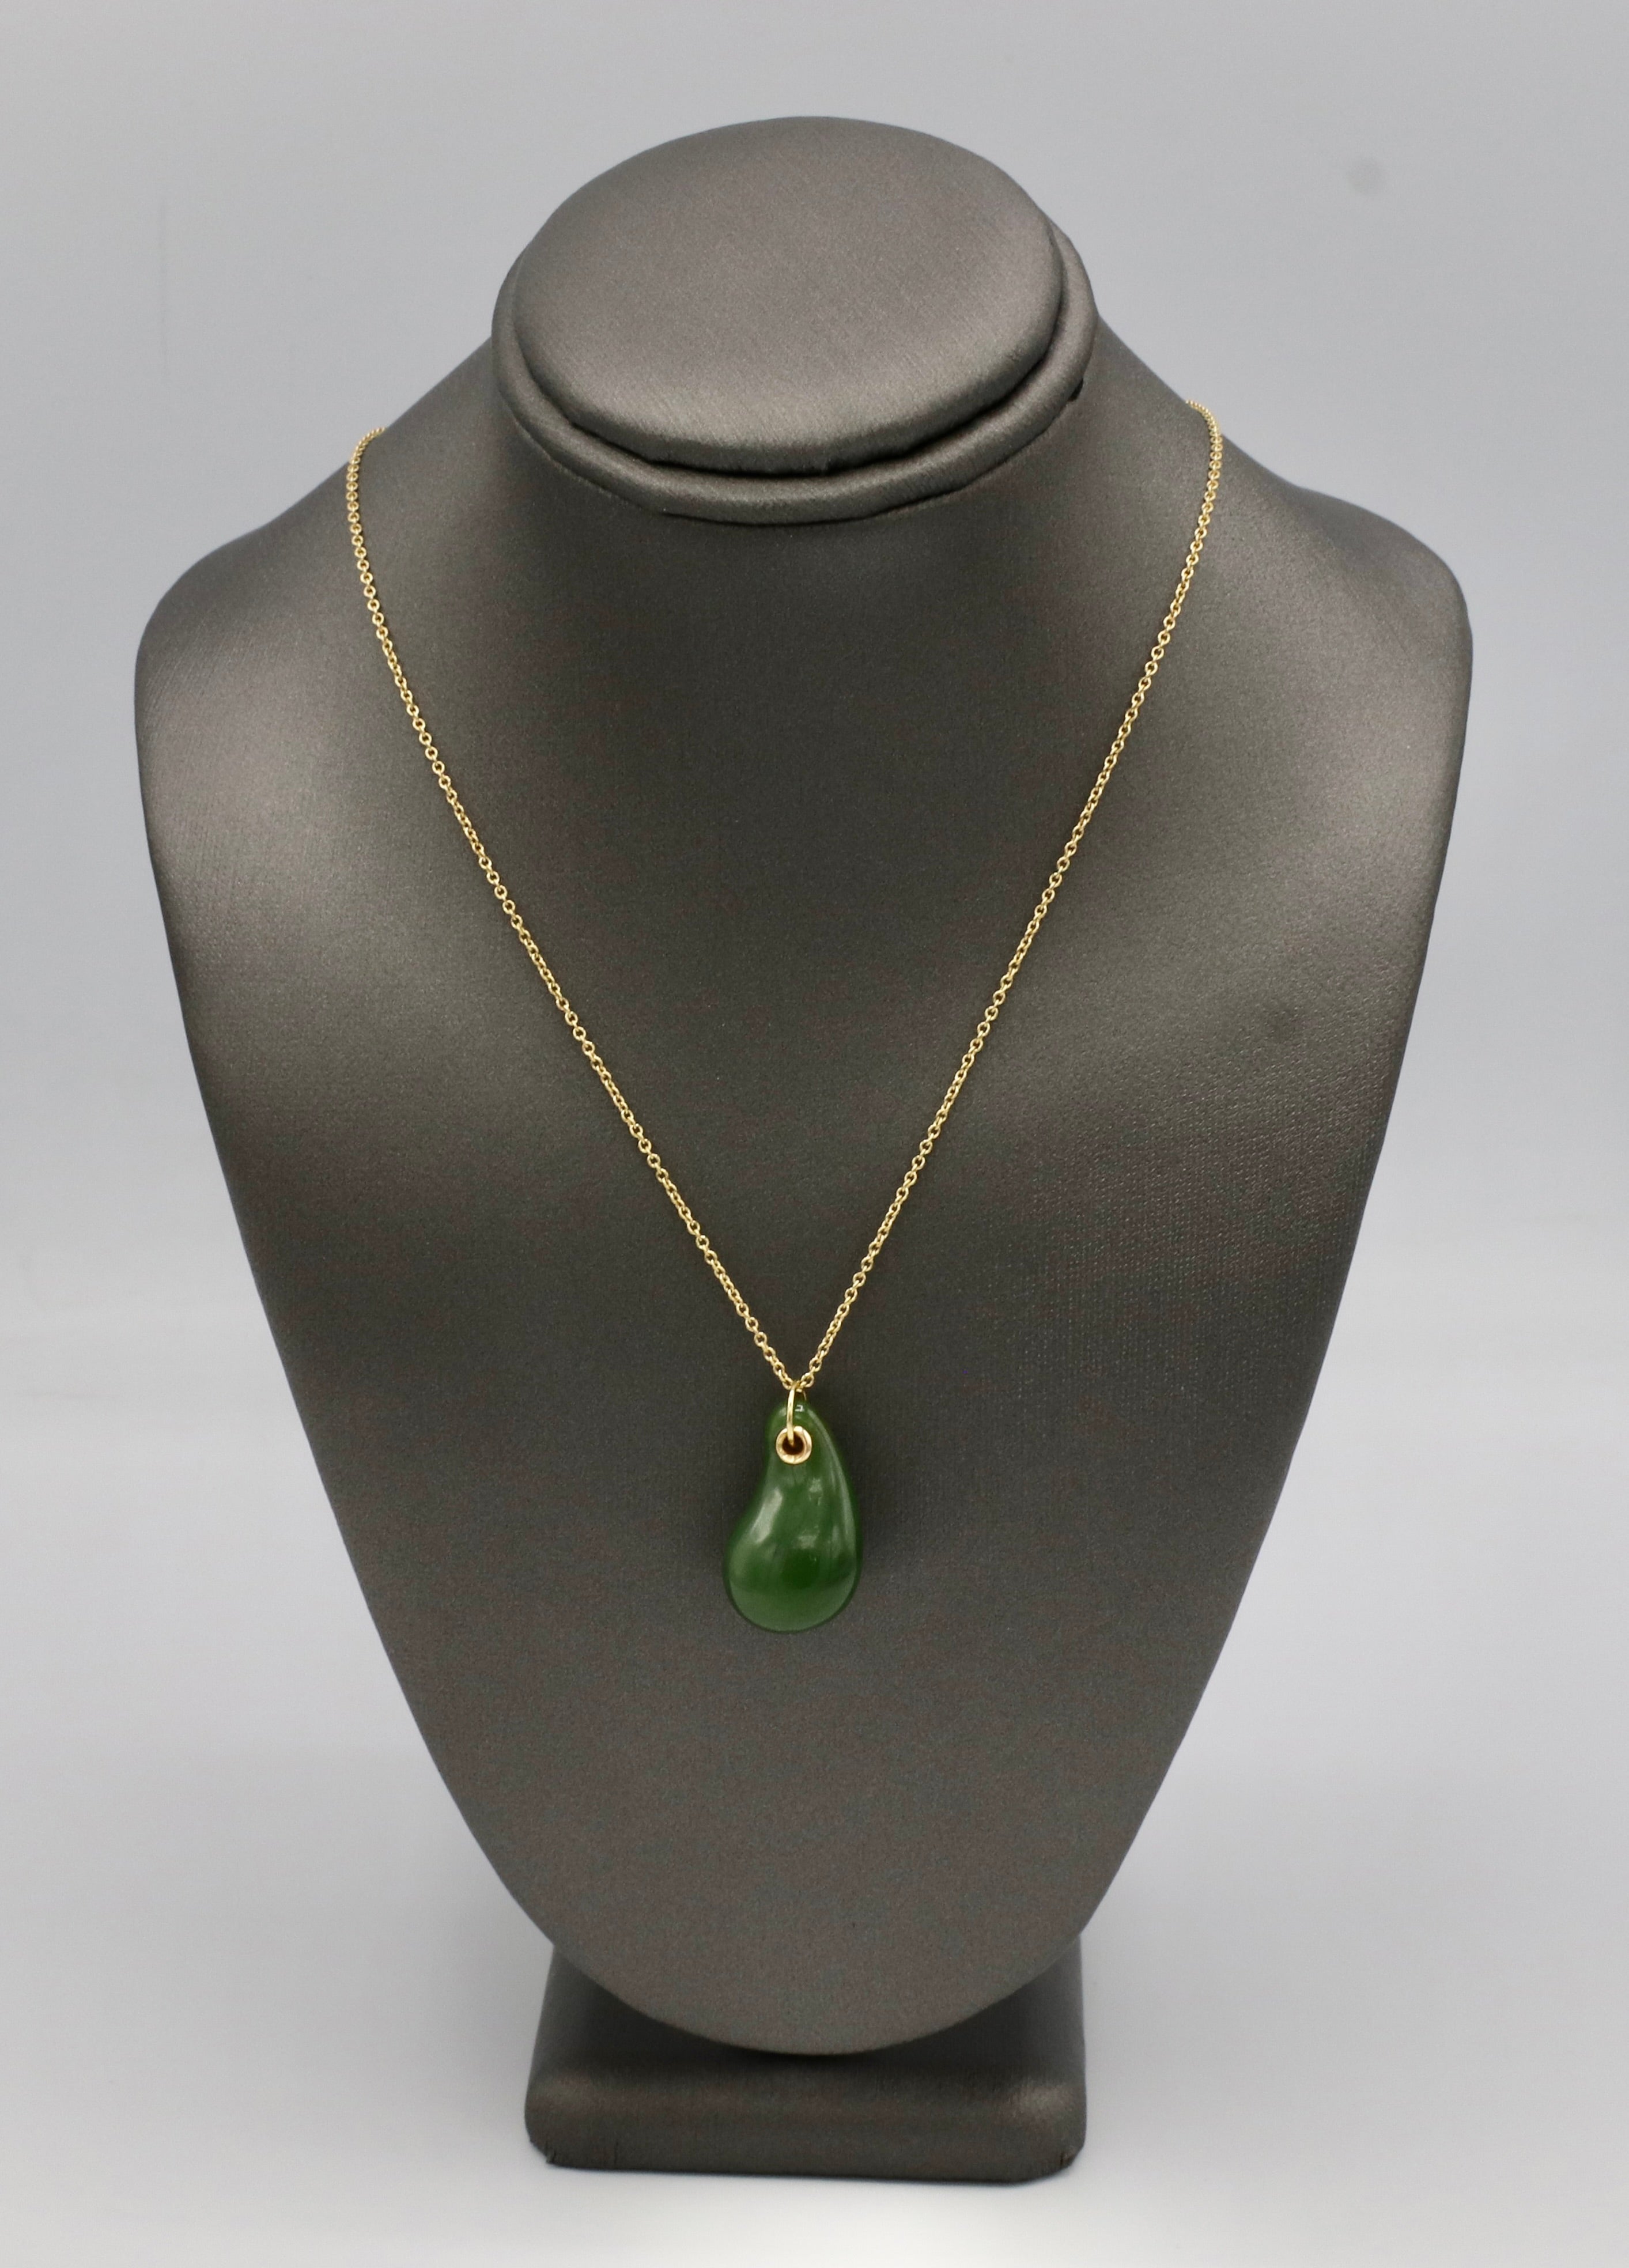 Tiffany & Co. Elsa Peretti 18K Yellow Gold Nephrite Teardrop Pendant Necklace
Metal: 18k yellow gold
Weight: 5.11 grams
Pendant: 21.5 x 12.5mm
Chain: 16 inches
Signed: TIFFANY & CO. PERETTI 750